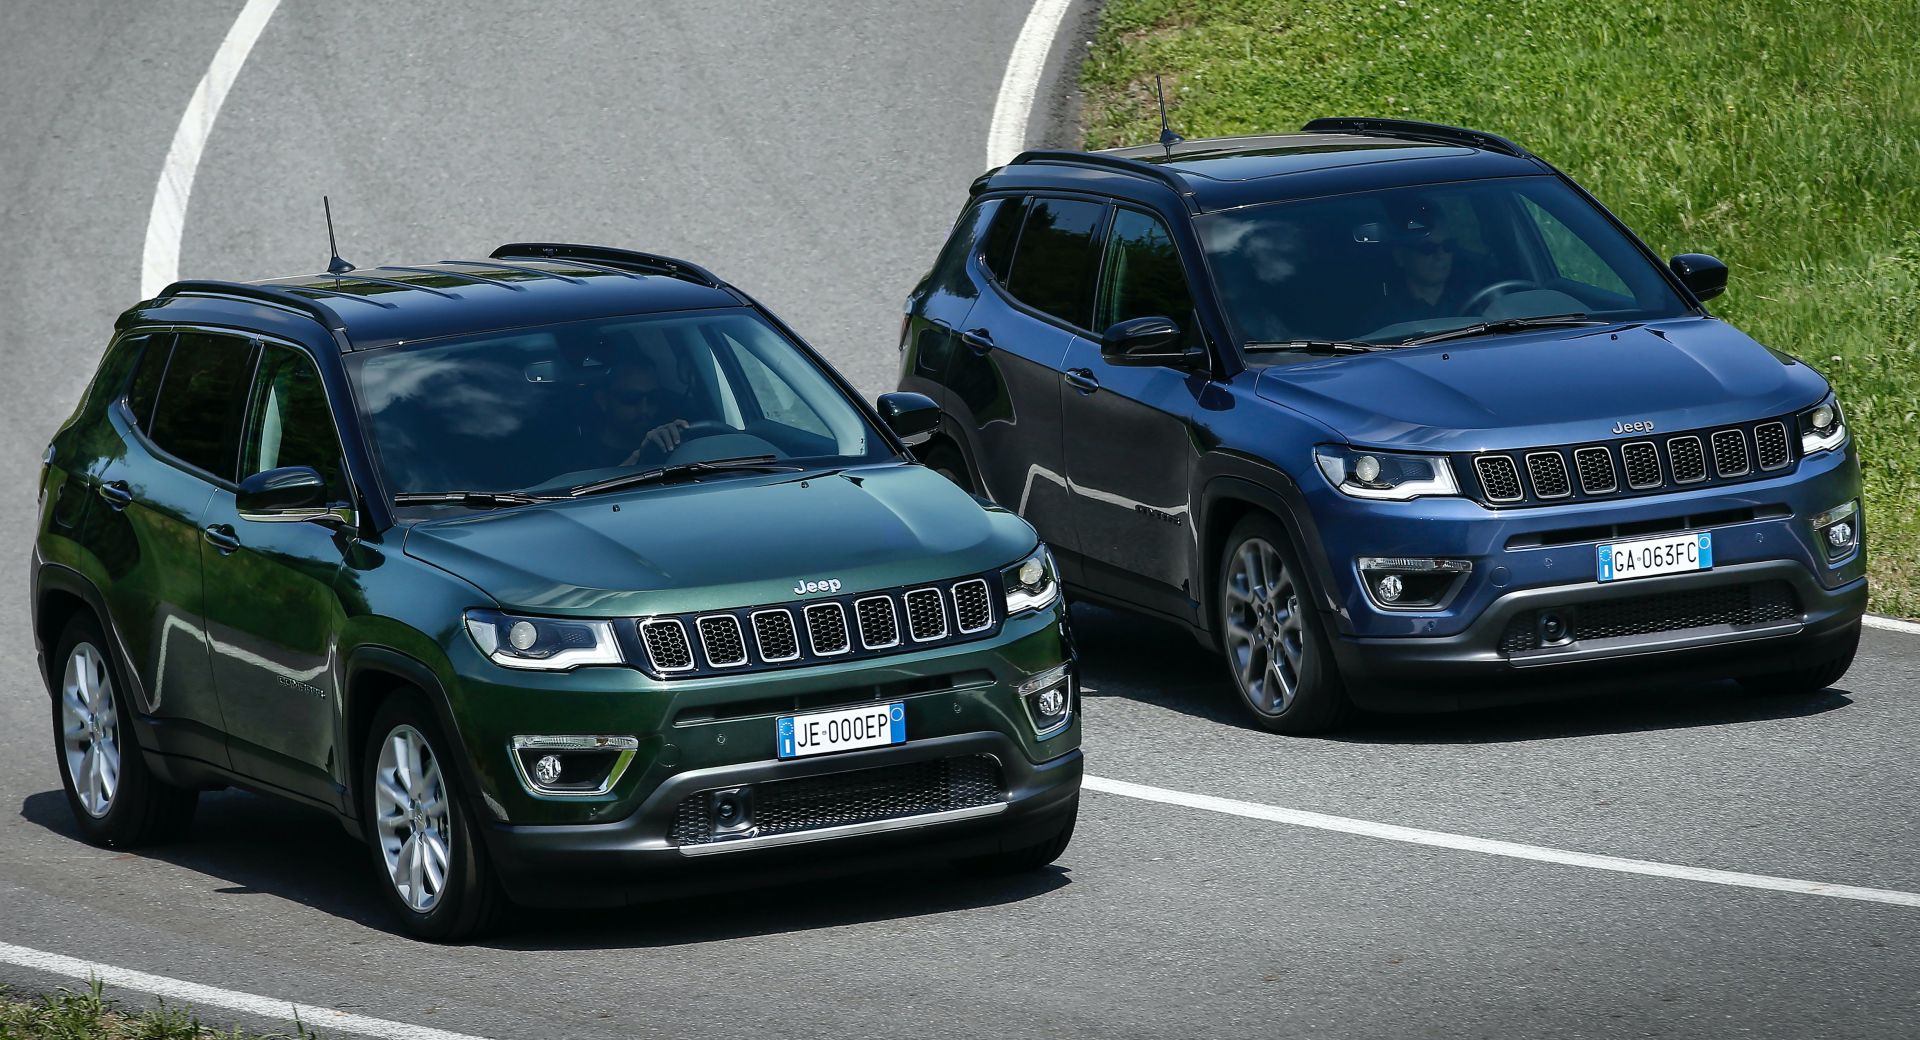 2021 Jeep Compass Gets New Engine And Range Of Updates In Europe